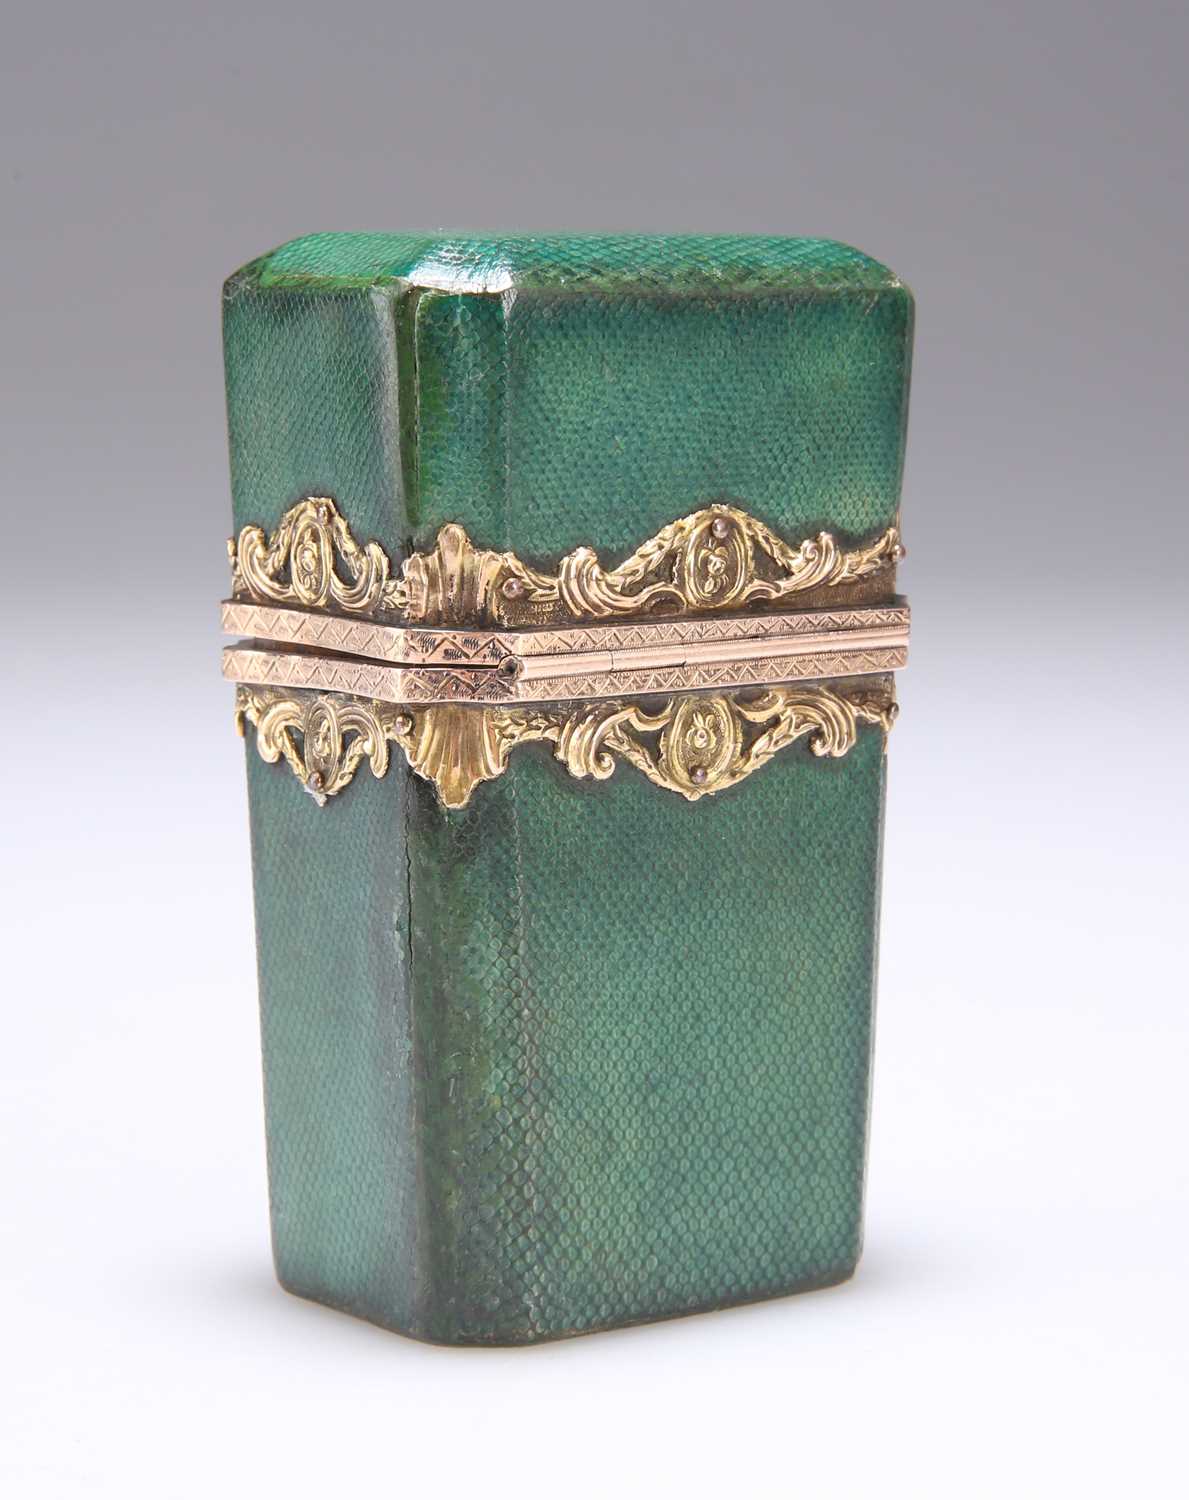 A SHAGREEN NÉCESSAIRE WITH GOLD MOUNTS, LONDON, CIRCA 1770 - Image 4 of 5